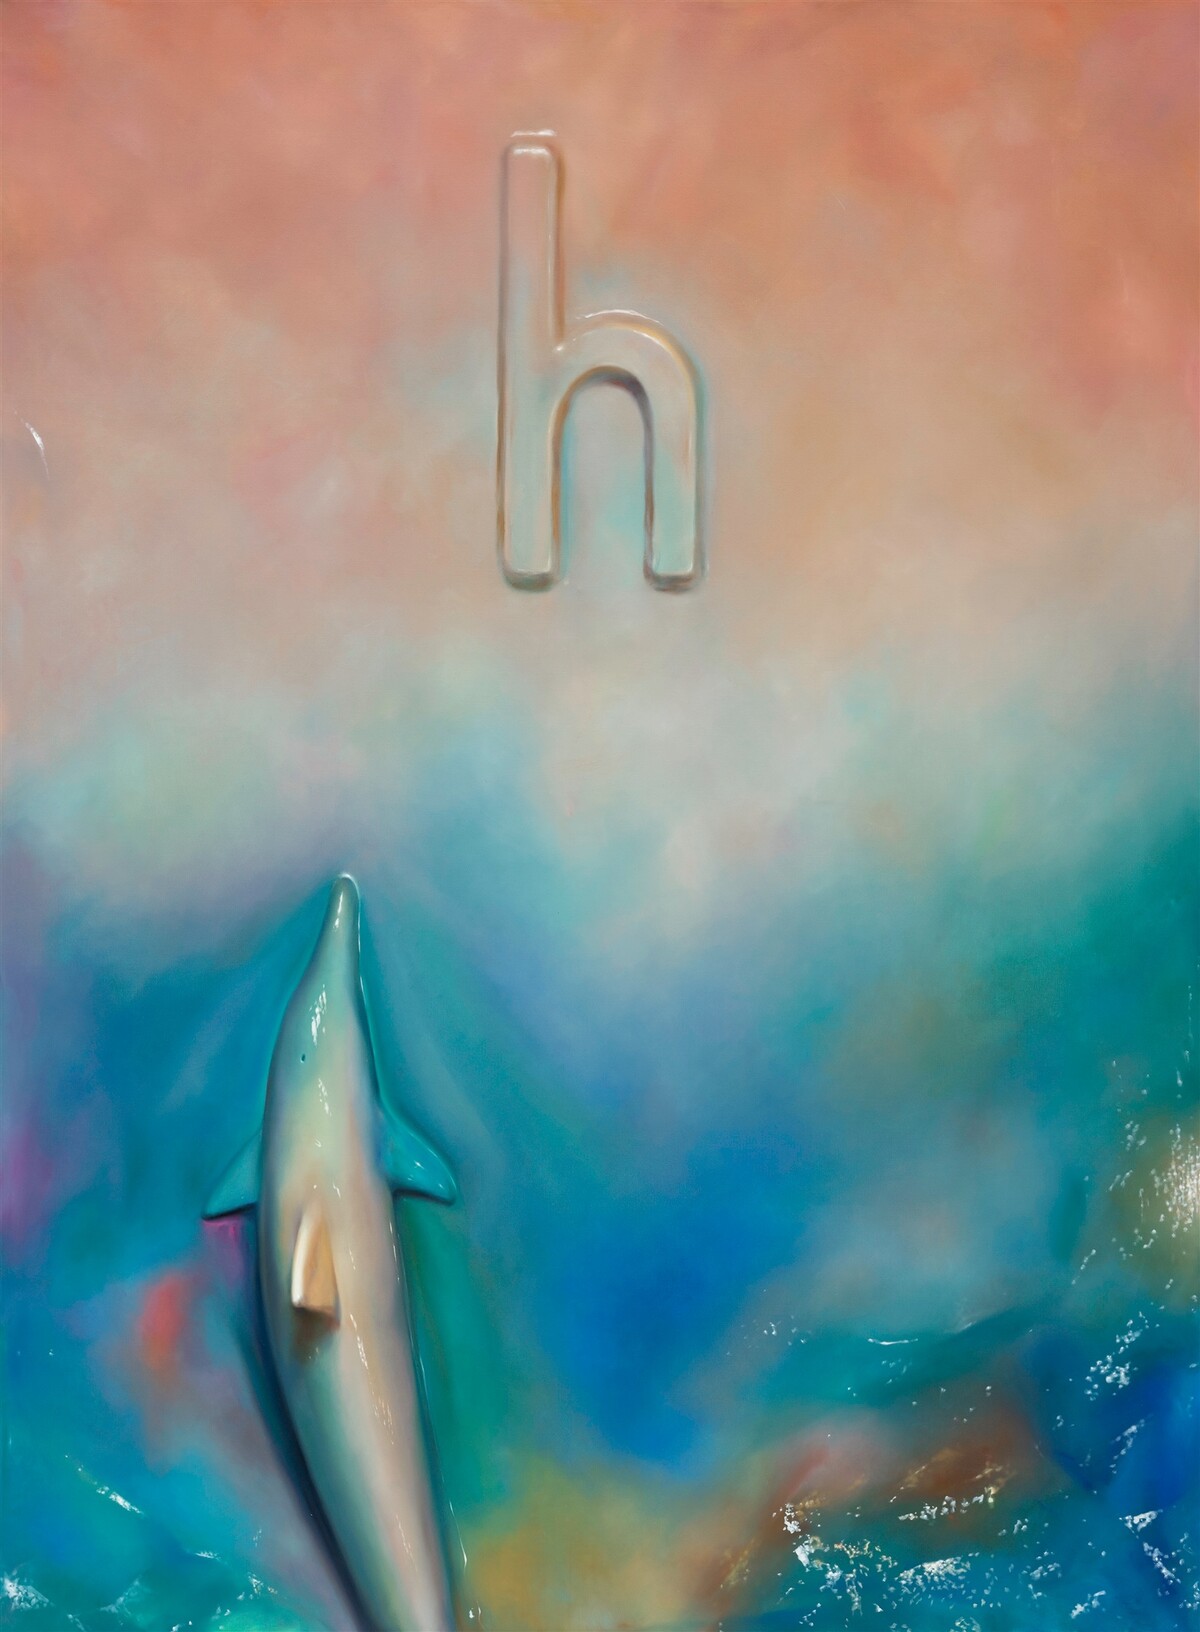 Francisco Sierra: Dolphin and h